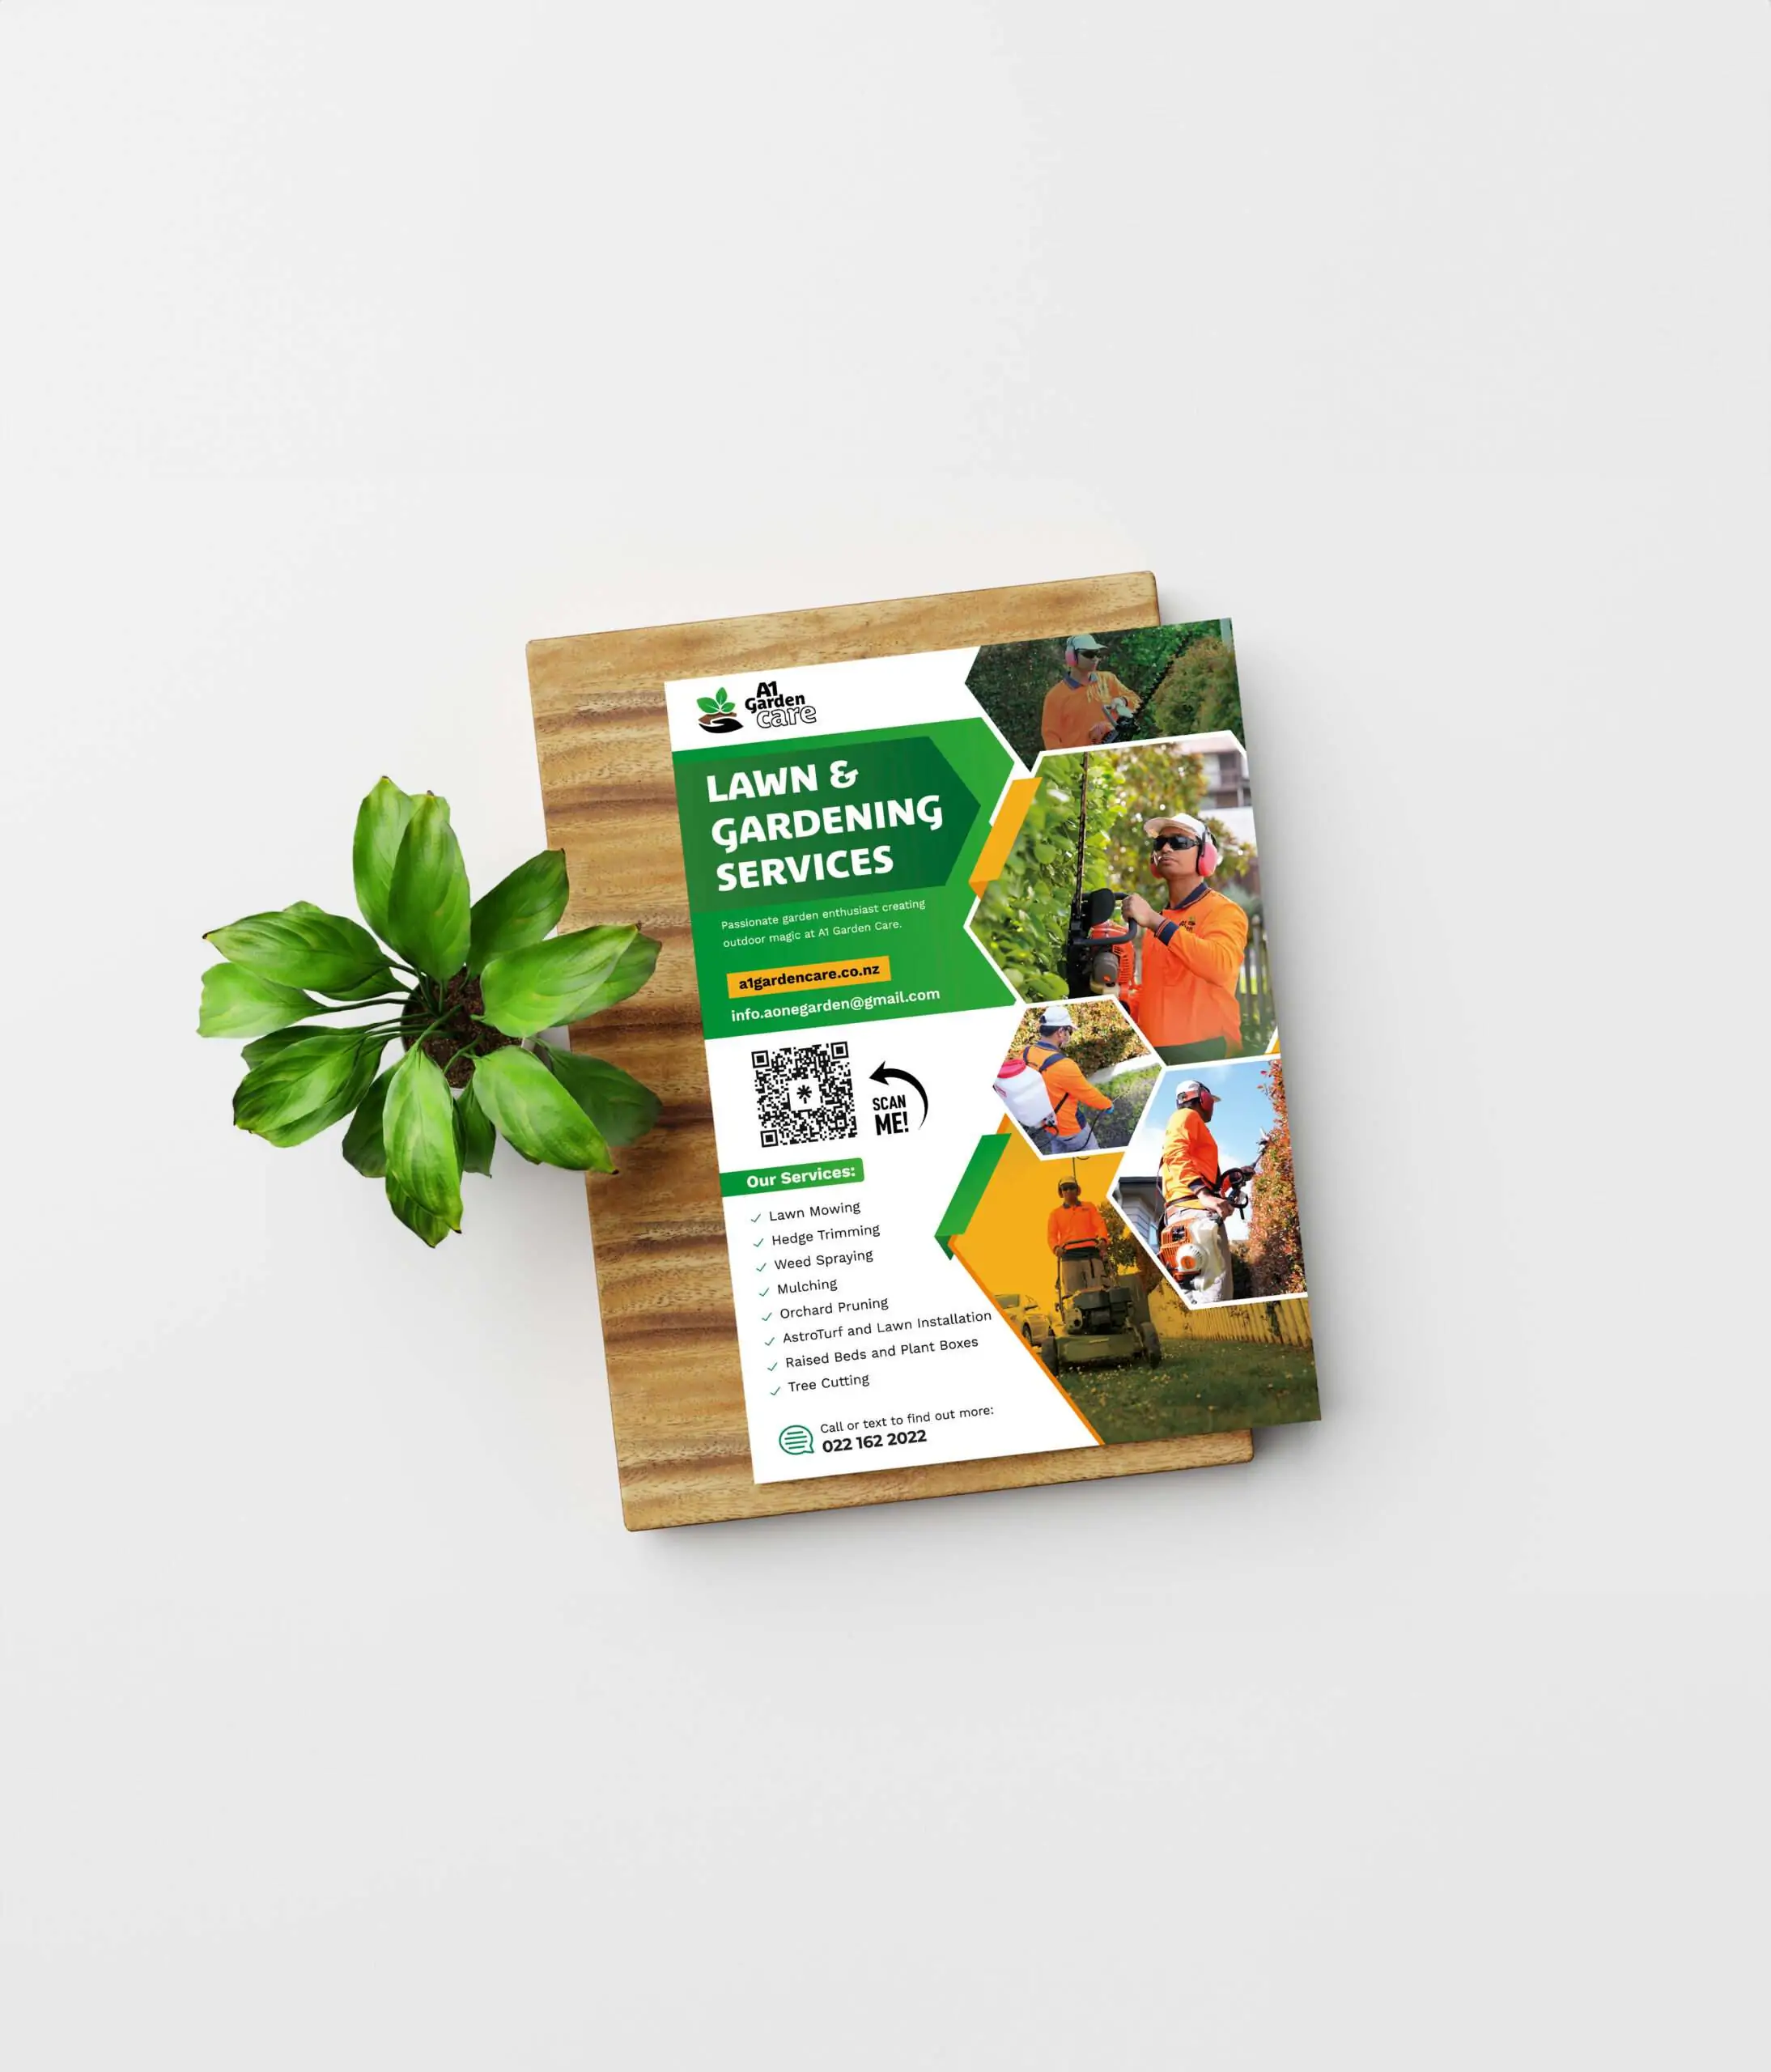 A promotional flyer for a lawn and gardening service is displayed next to a small plant on a white background. the flyer features images of gardeners at work and includes contact details and a qr code.